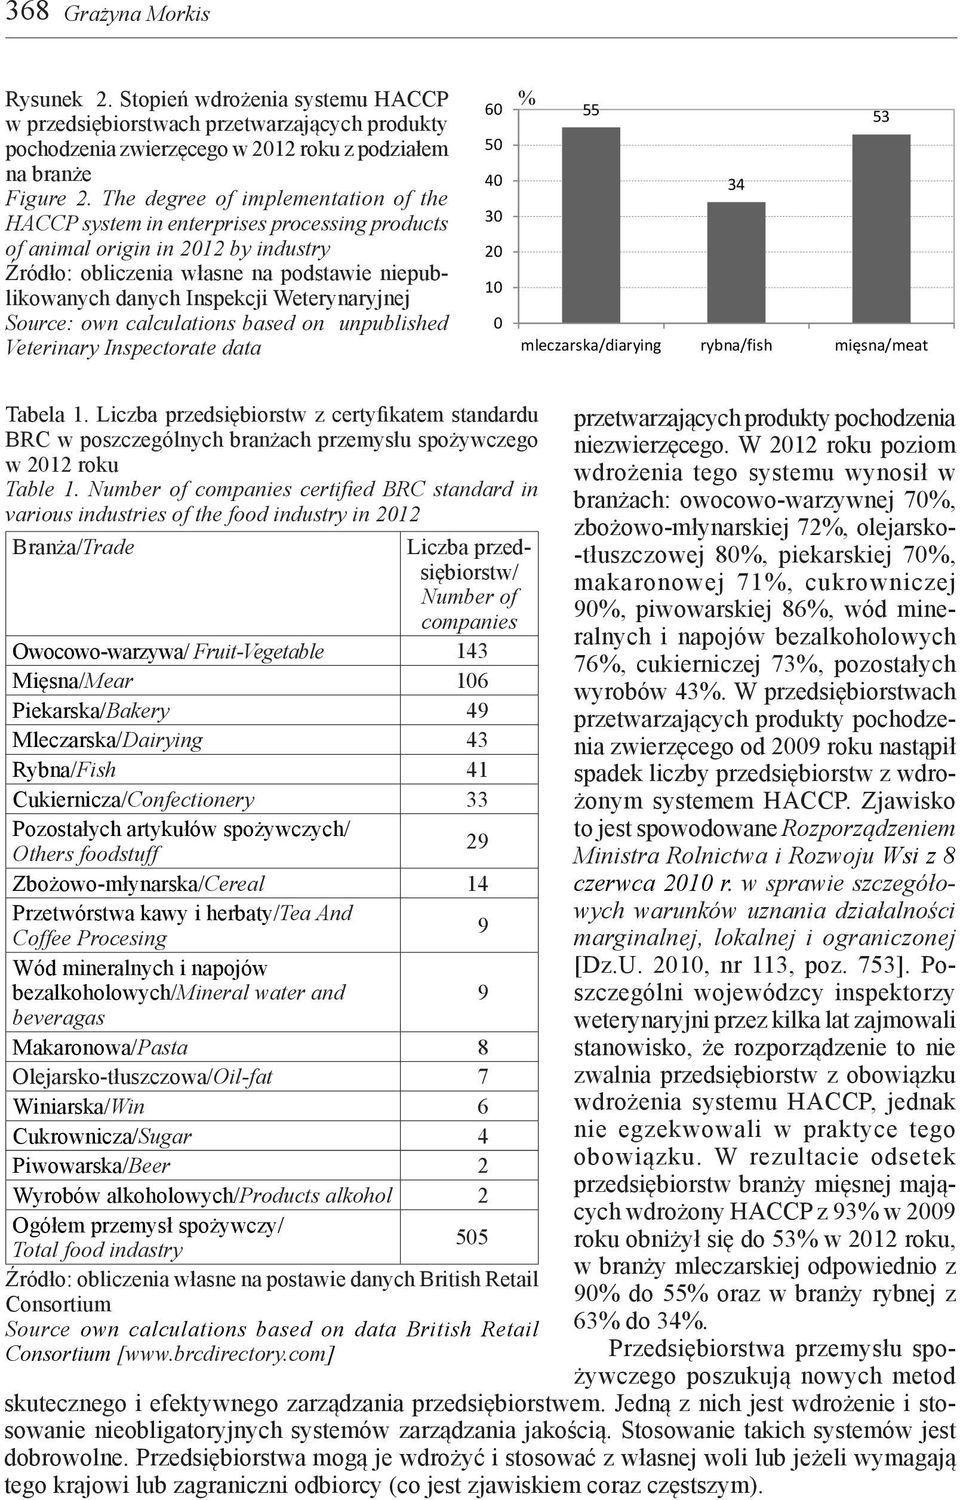 Weterynaryjnej Source: own calculations based on unpublished Veterinary Inspectorate data 60 50 40 30 20 10 0 % 55 53 34 mleczarska/diarying rybna/fish mięsna/meat Tabela 1.